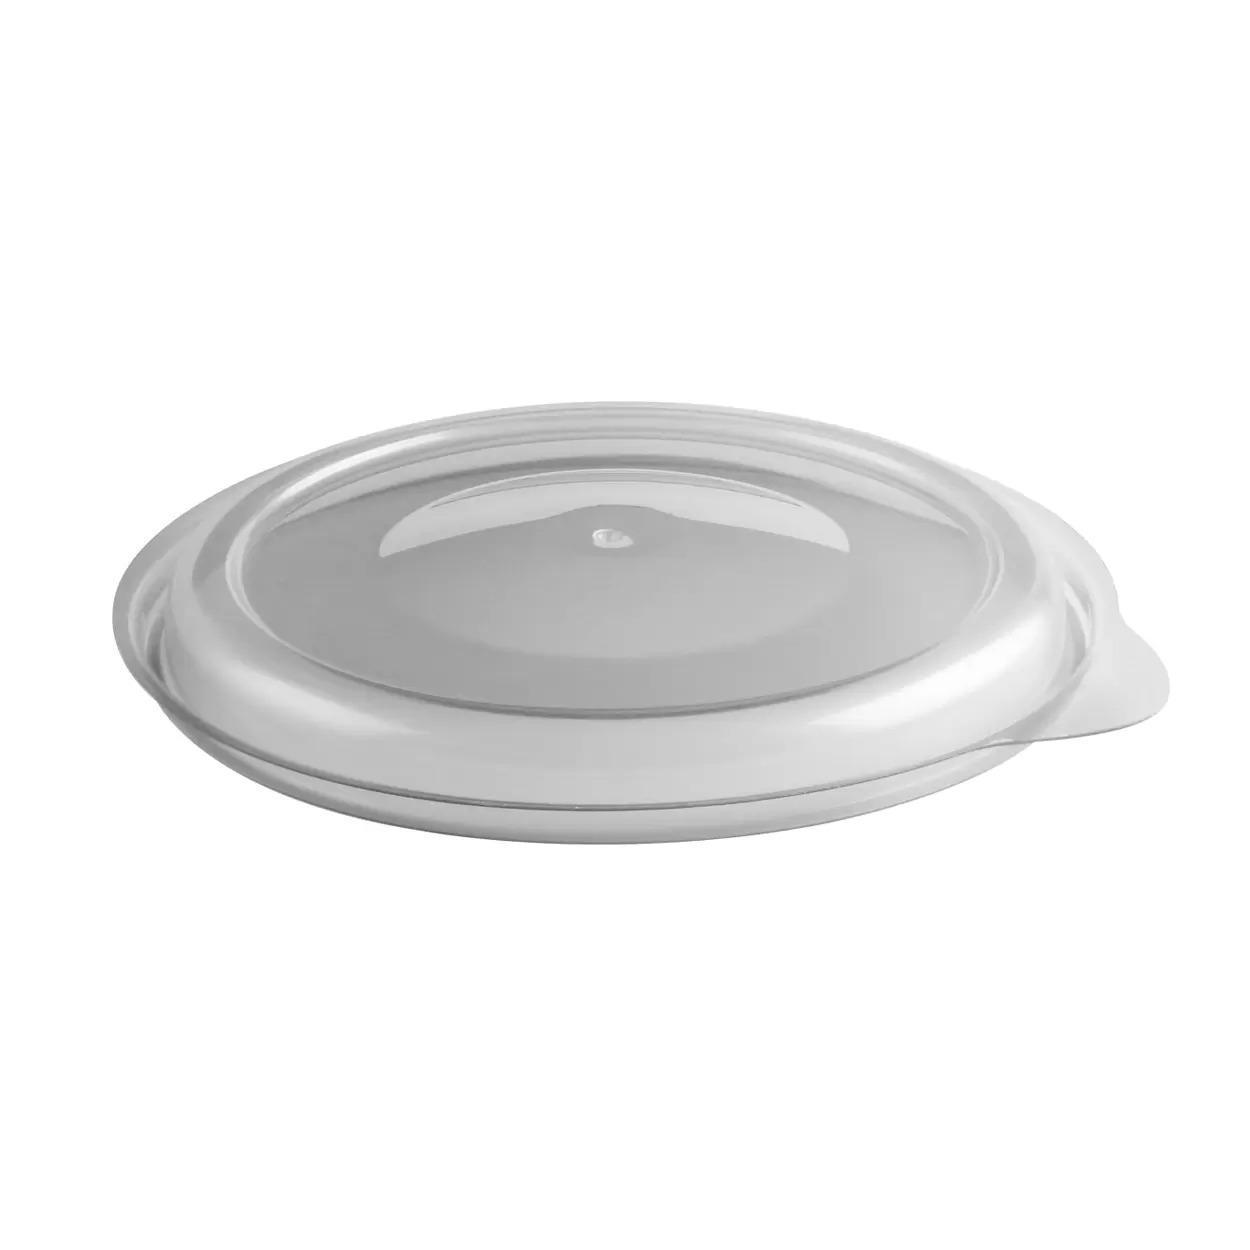 Product Incredi-Bowls® LH4800D - Anchor Packaging image